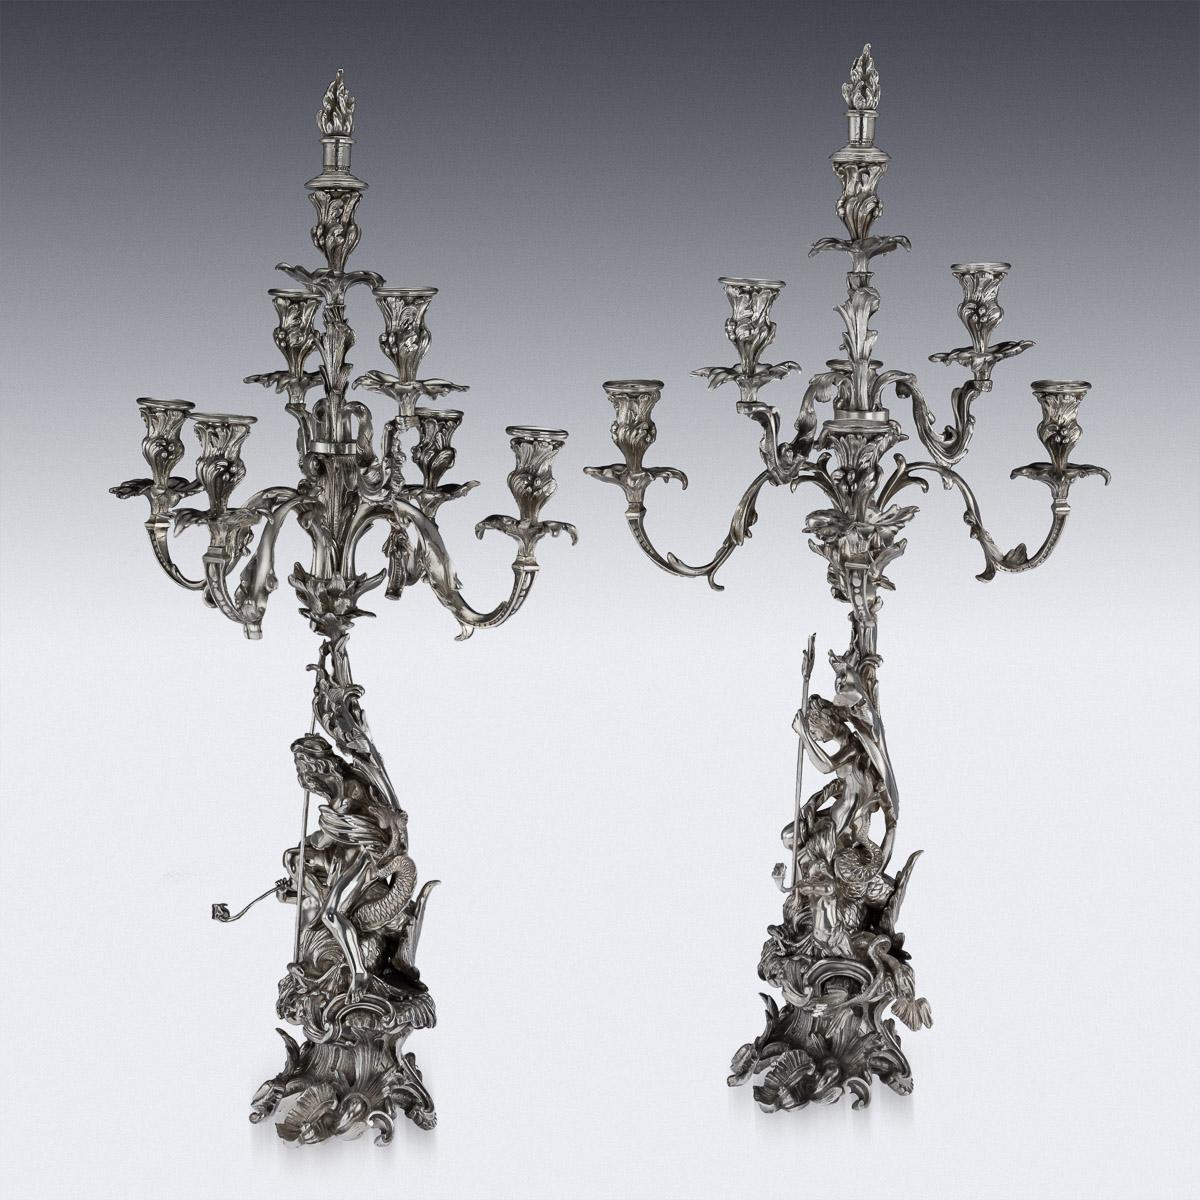 Antique 19th century French silvered bronze pair of monumental sculptural candelabra on rococo bases, representing Poseidon and Amphitrite, each holding a trident and resting on a coiled mythical dolphin, bases supporting an acanthus leaf